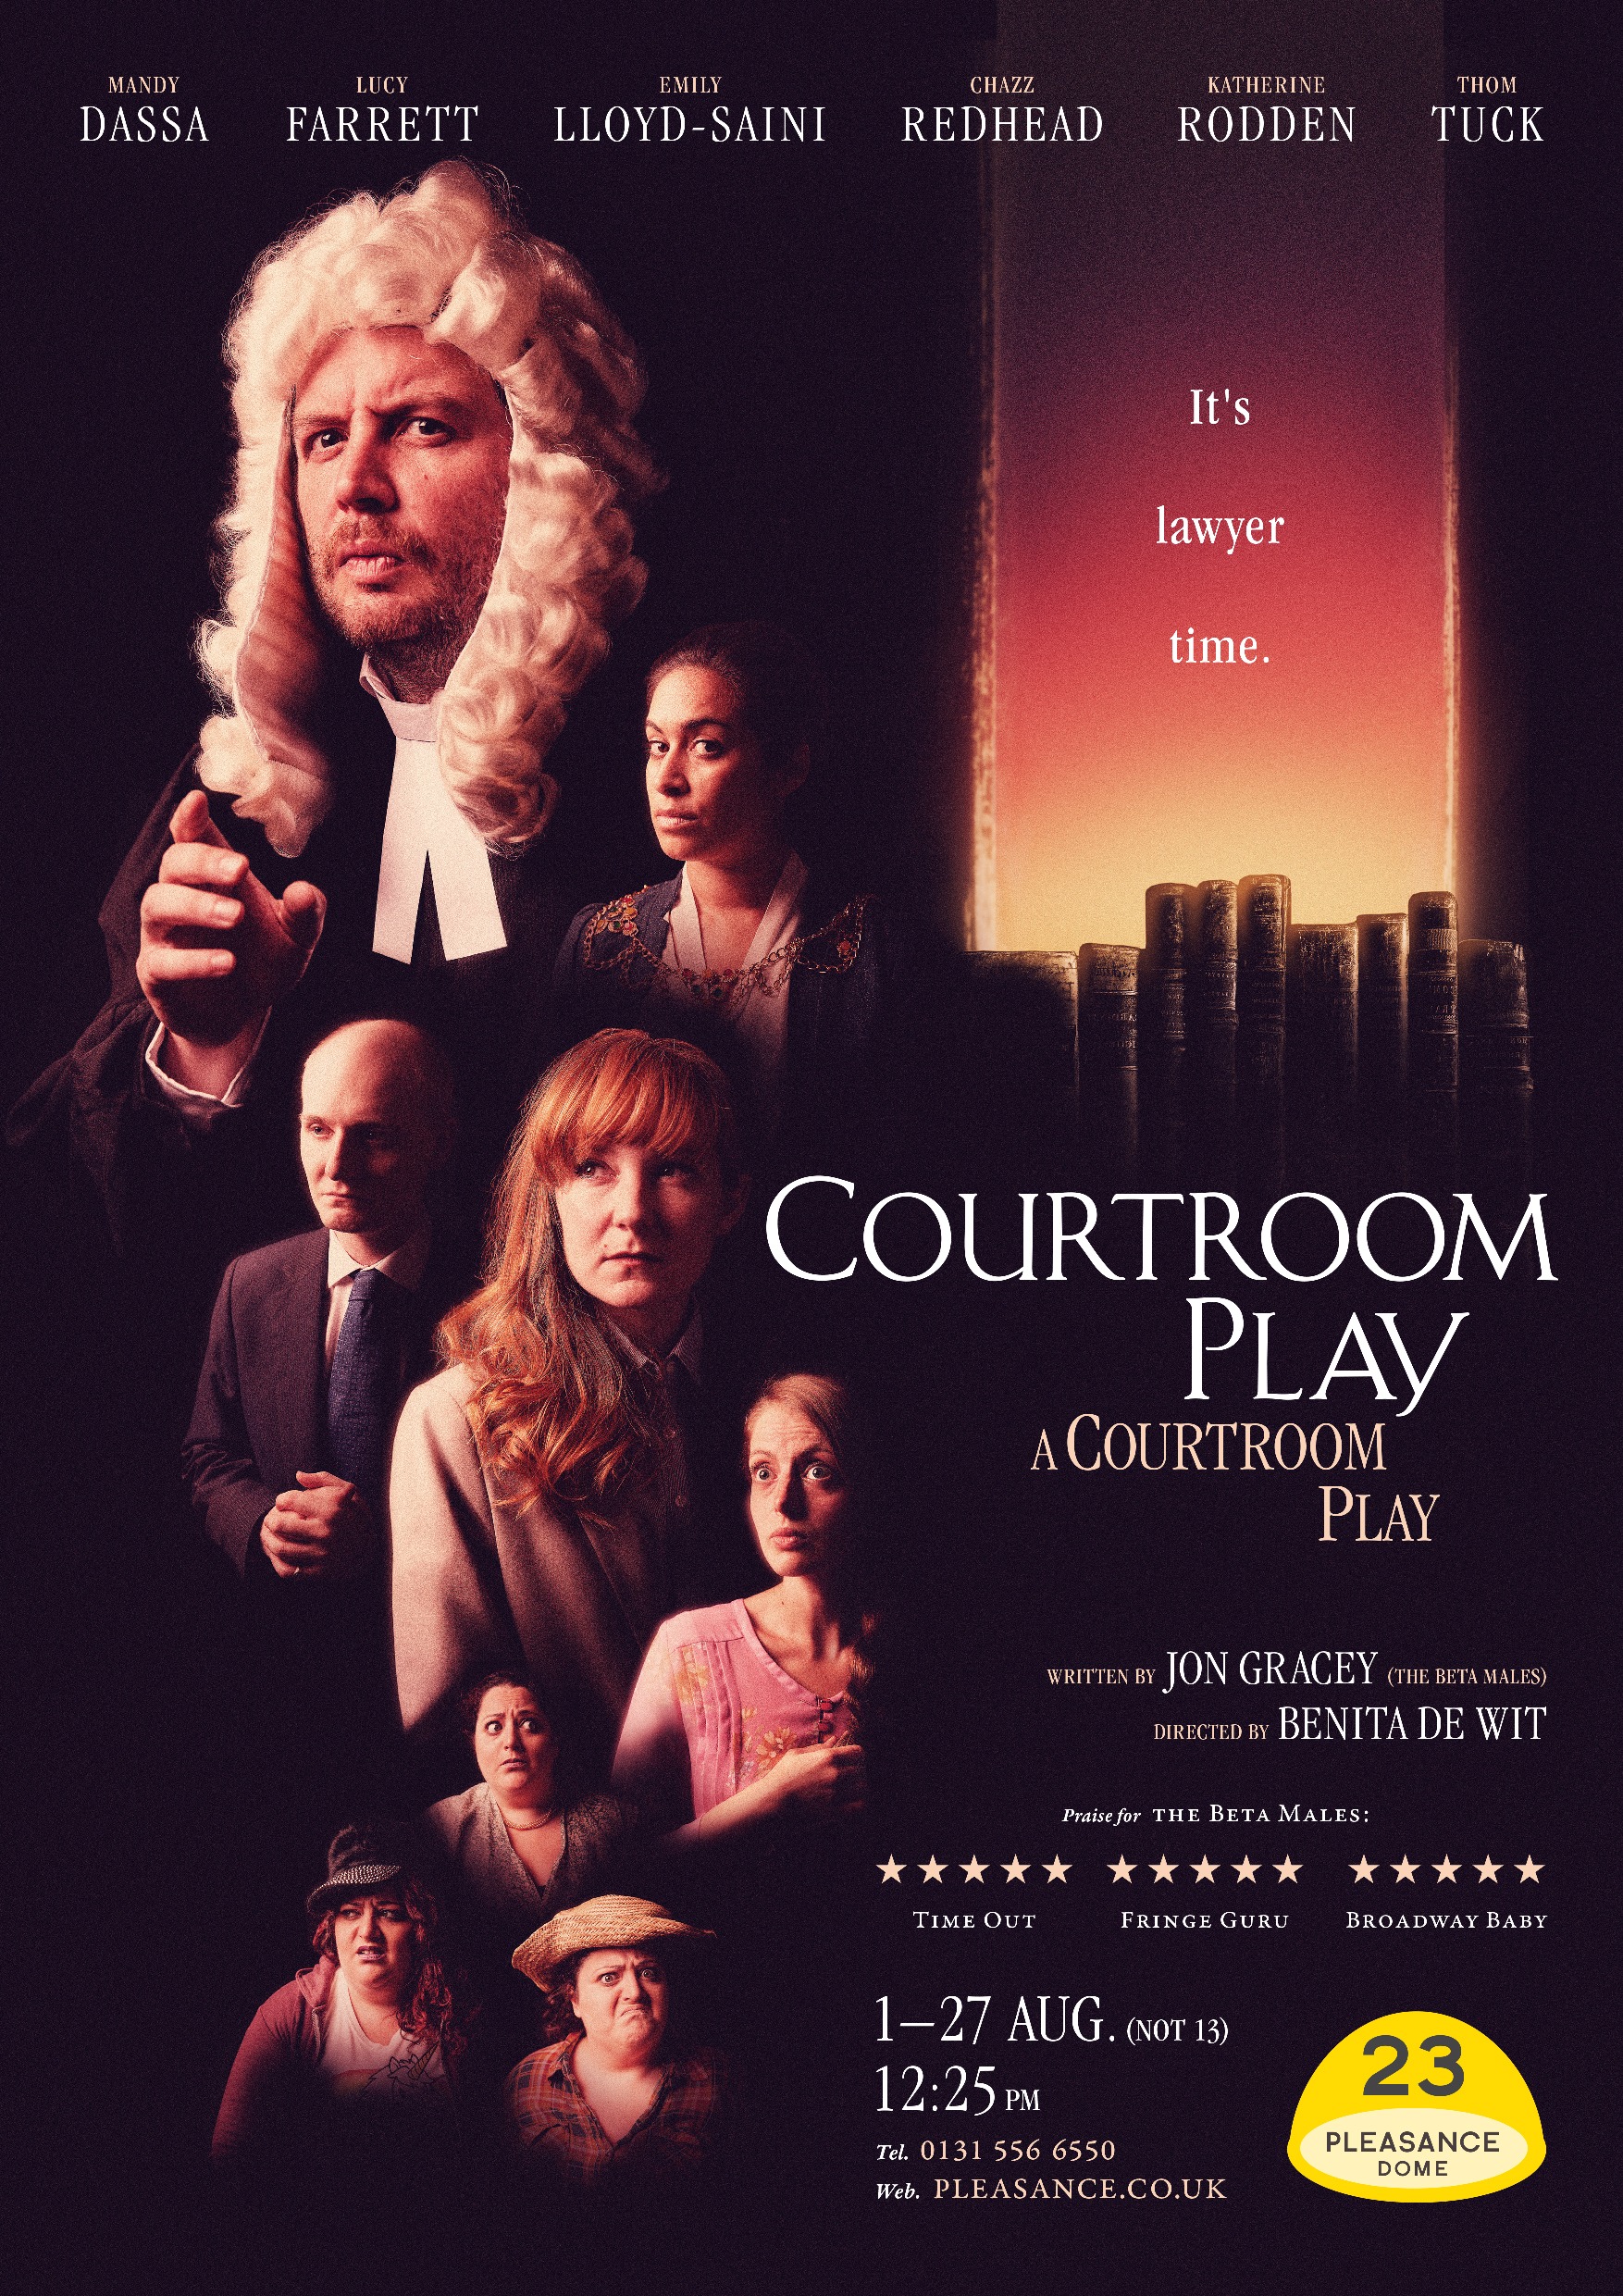 The poster for Courtroom Play: A Courtroom Play